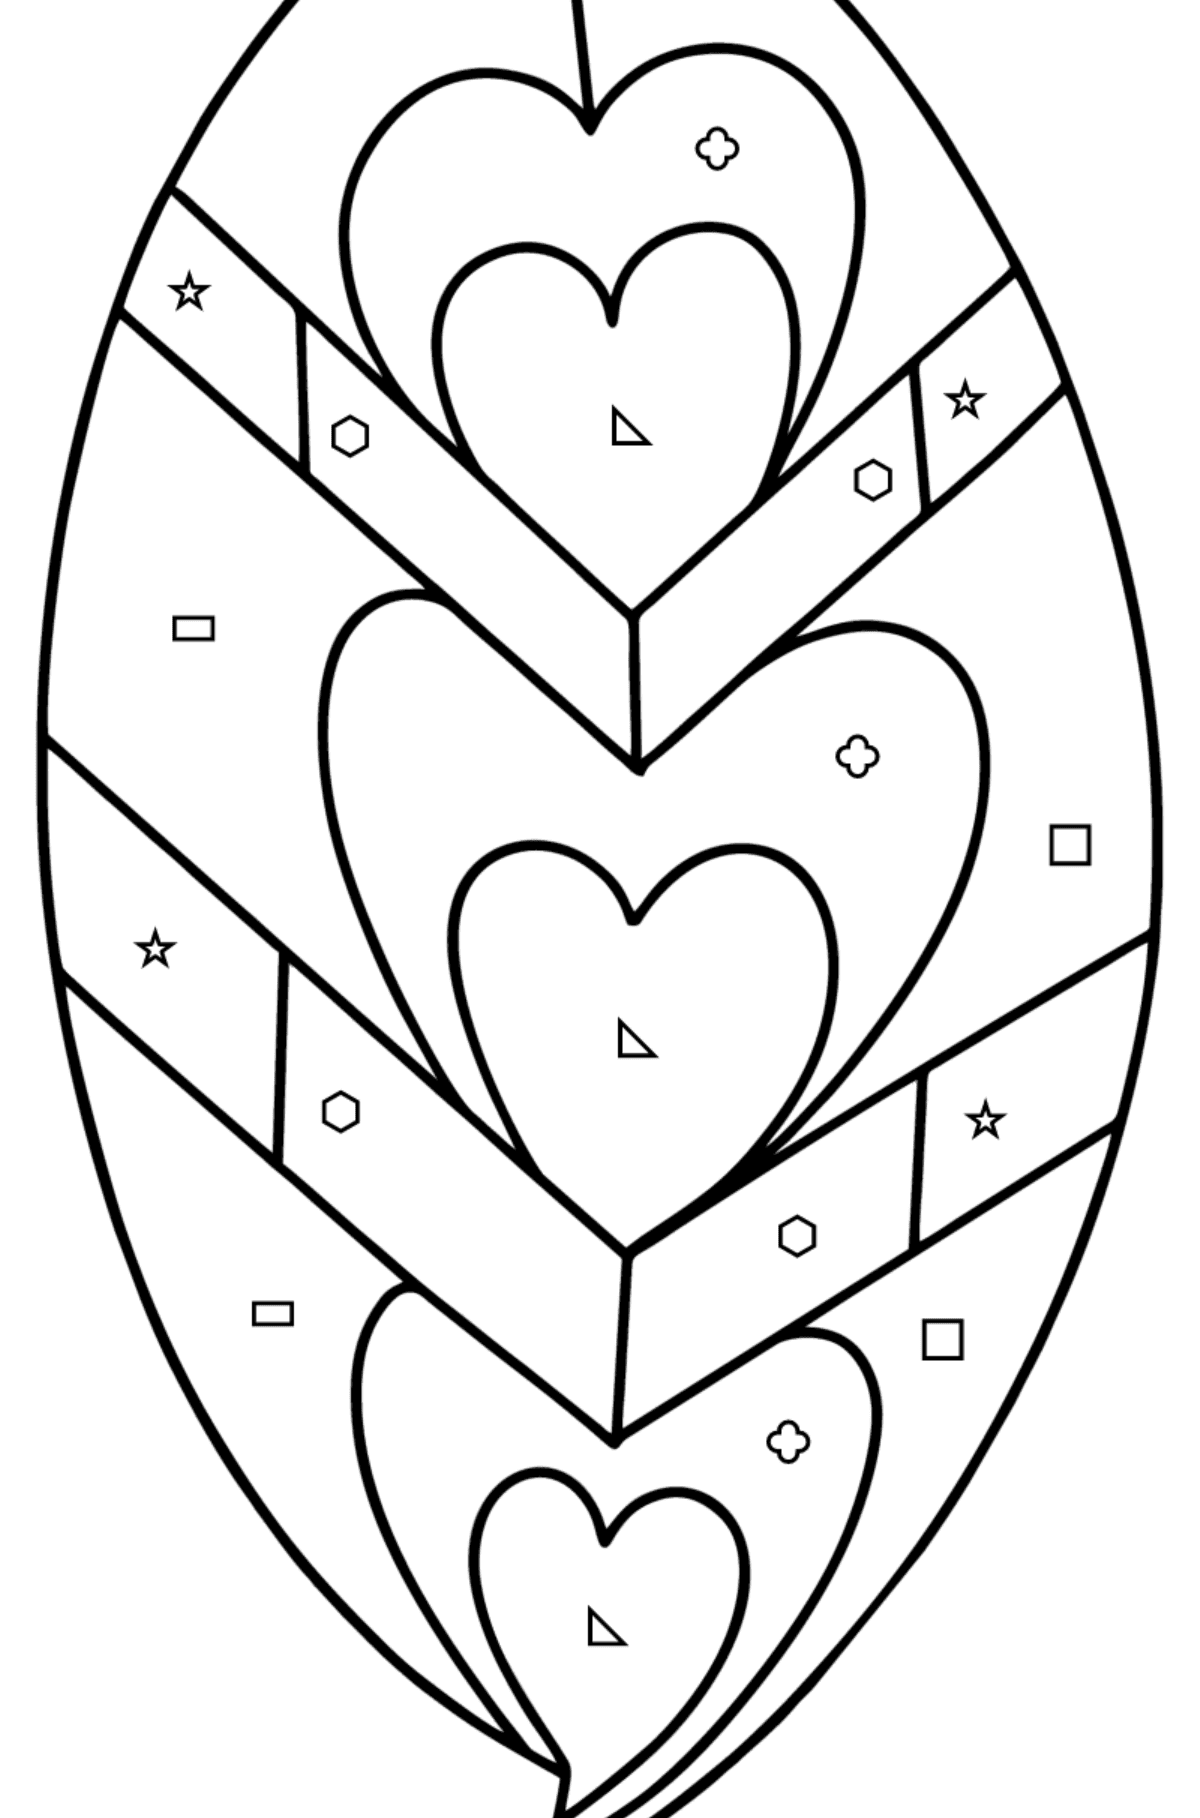 Zentangle Leaf coloring page - Coloring by Geometric Shapes for Kids